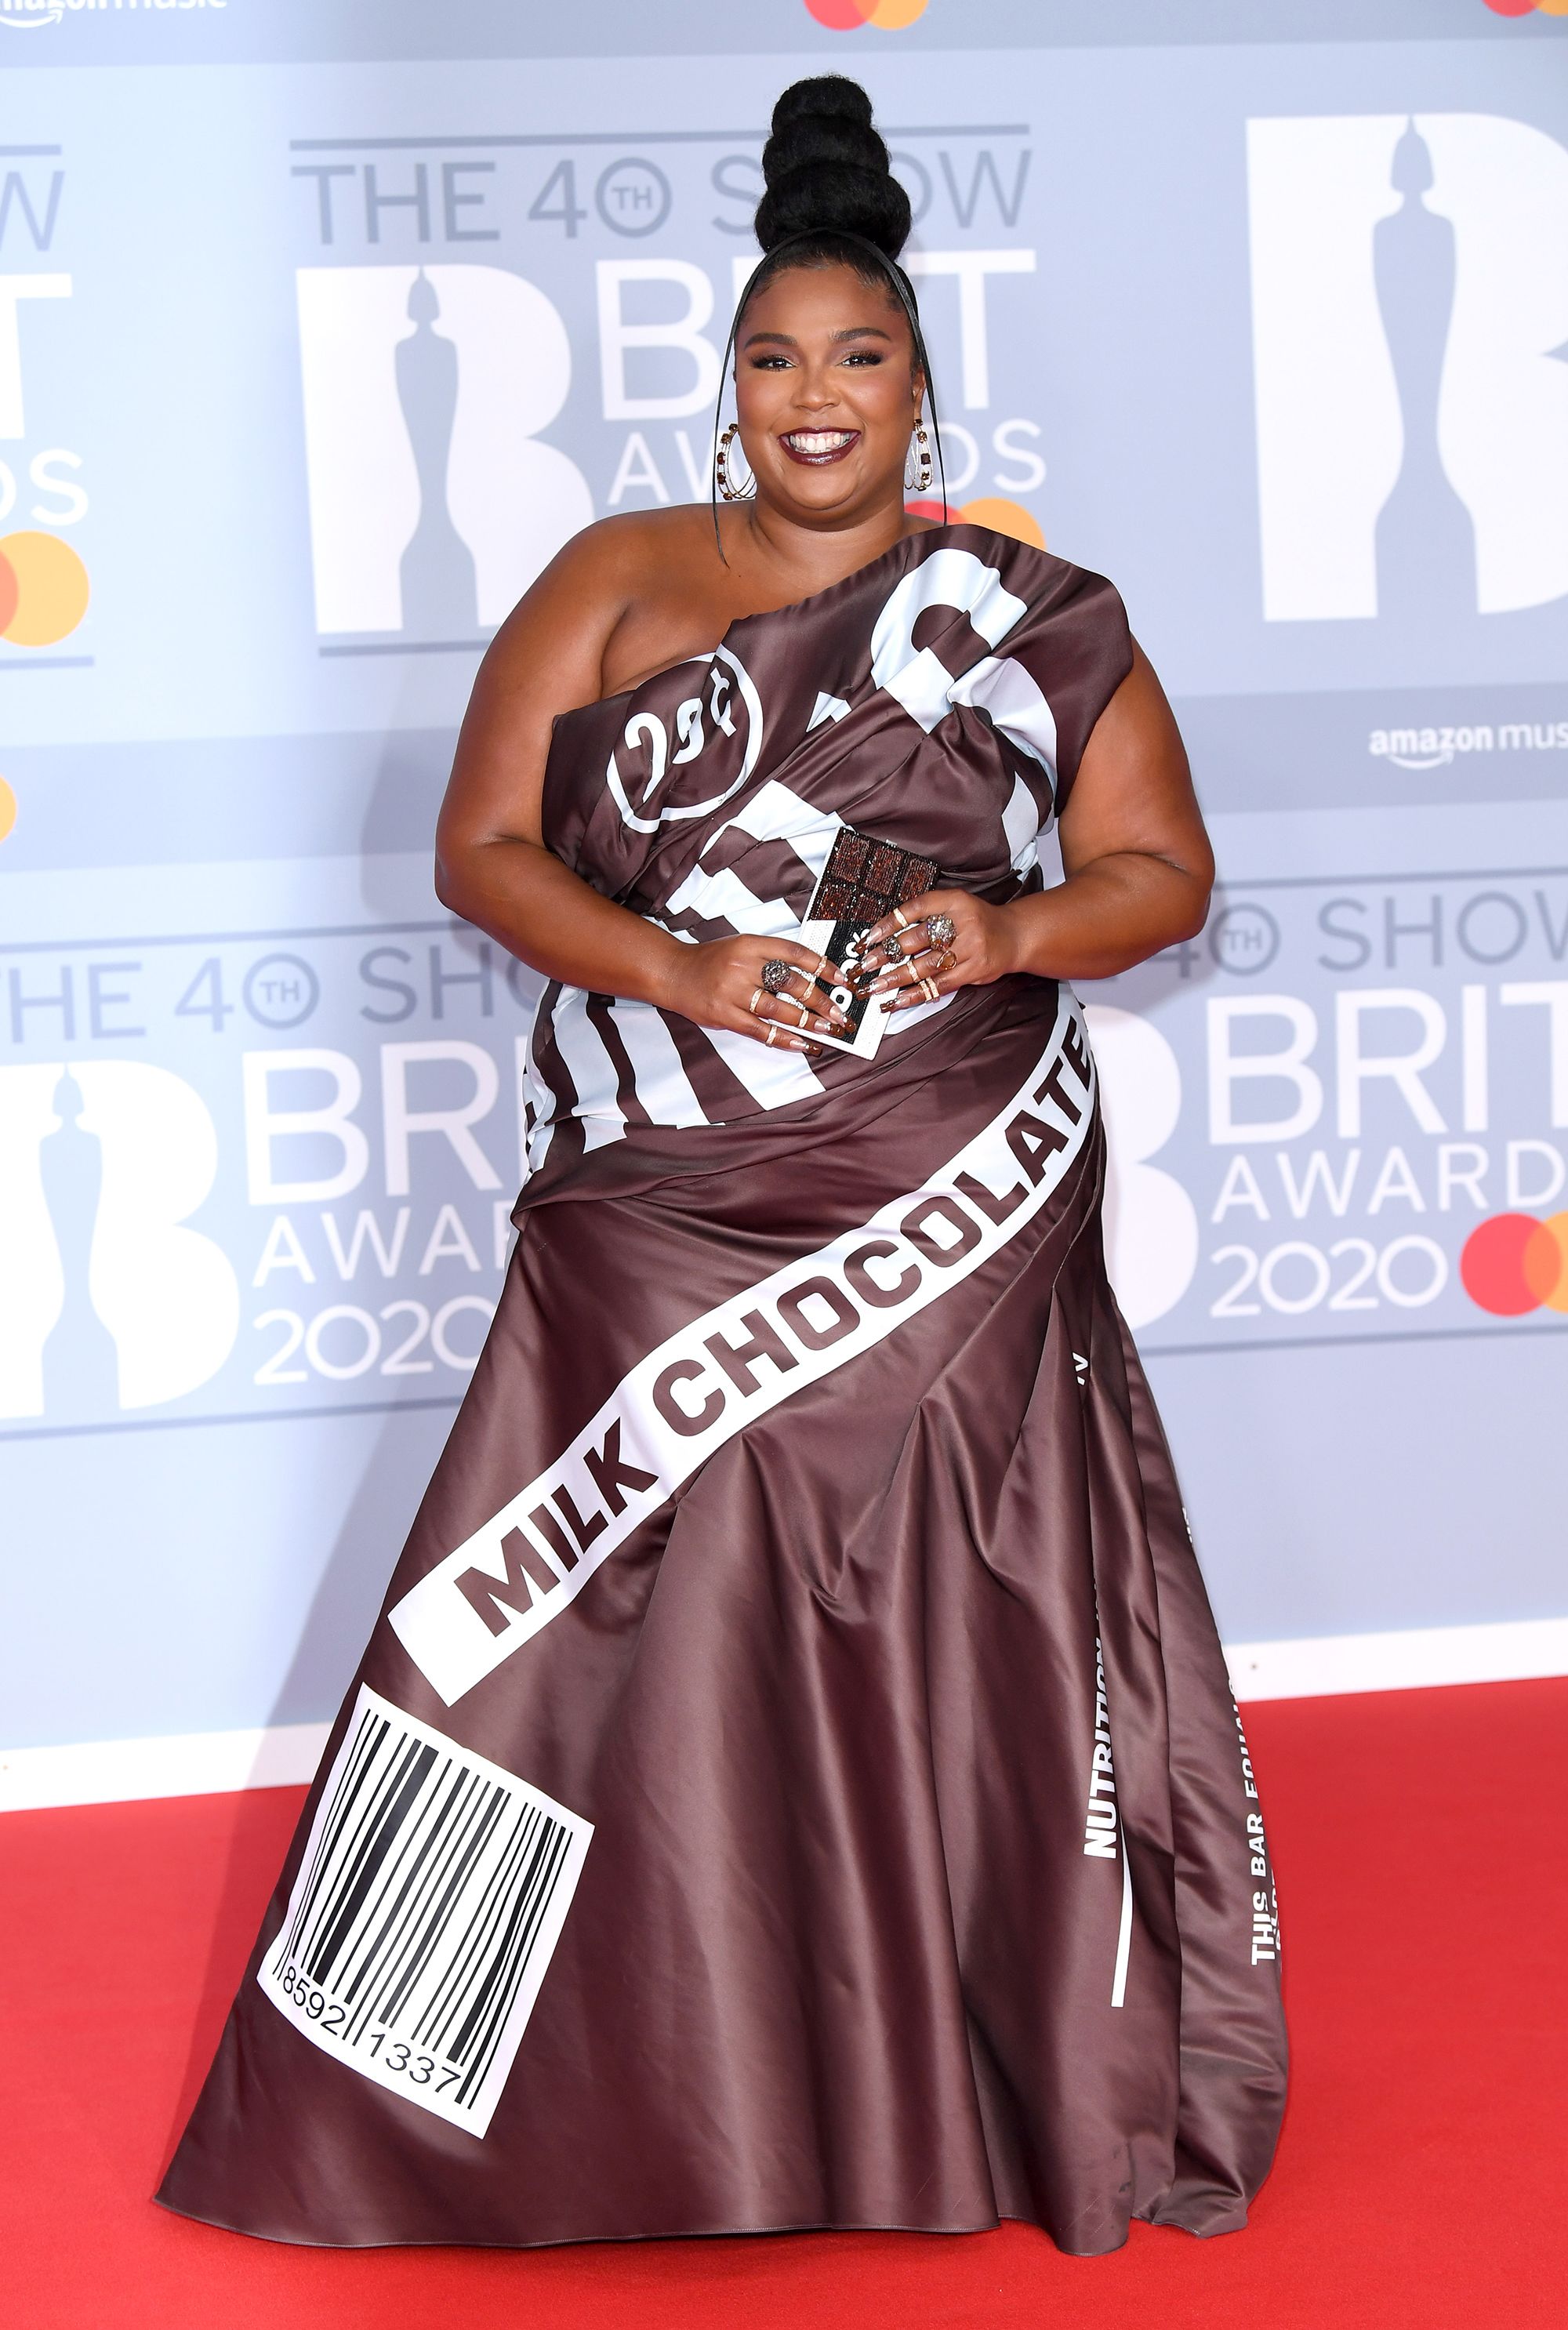 Brit Awards 2023 Red Carpet: The Best Fashion Moments